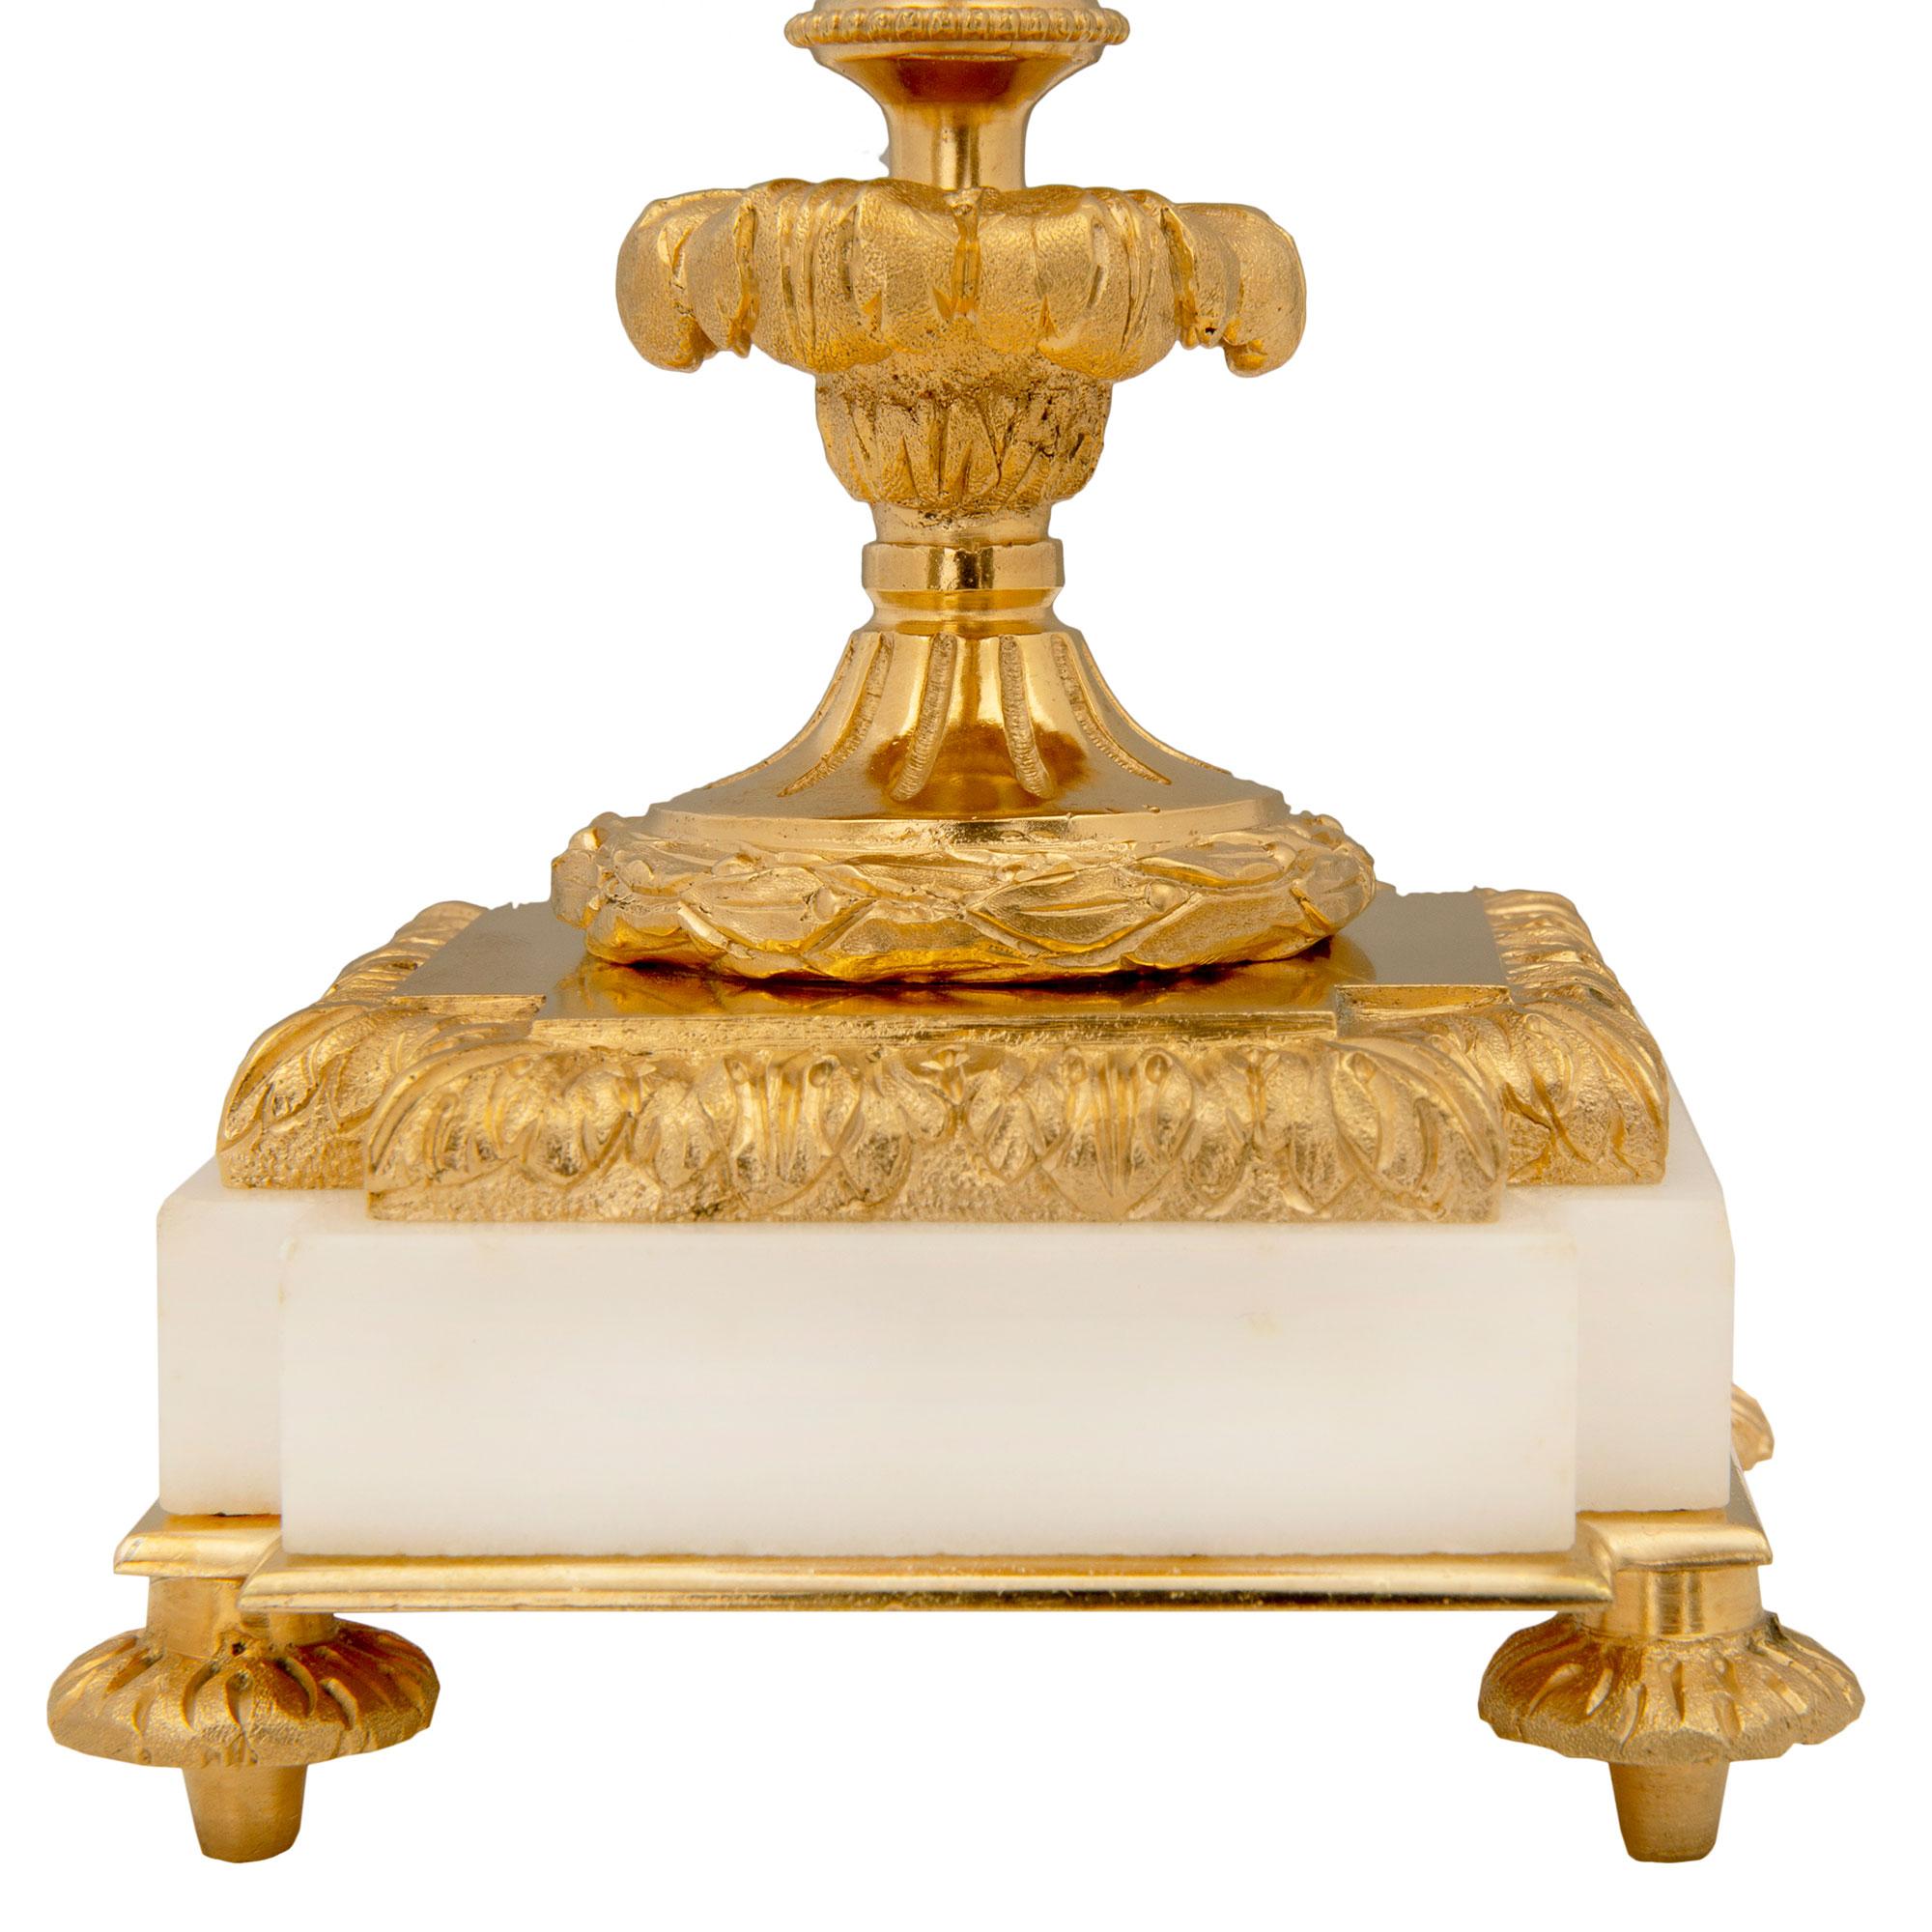 French 19th Century Louis XVI Style Marble and Ormolu Two-Arm Candelabras For Sale 3